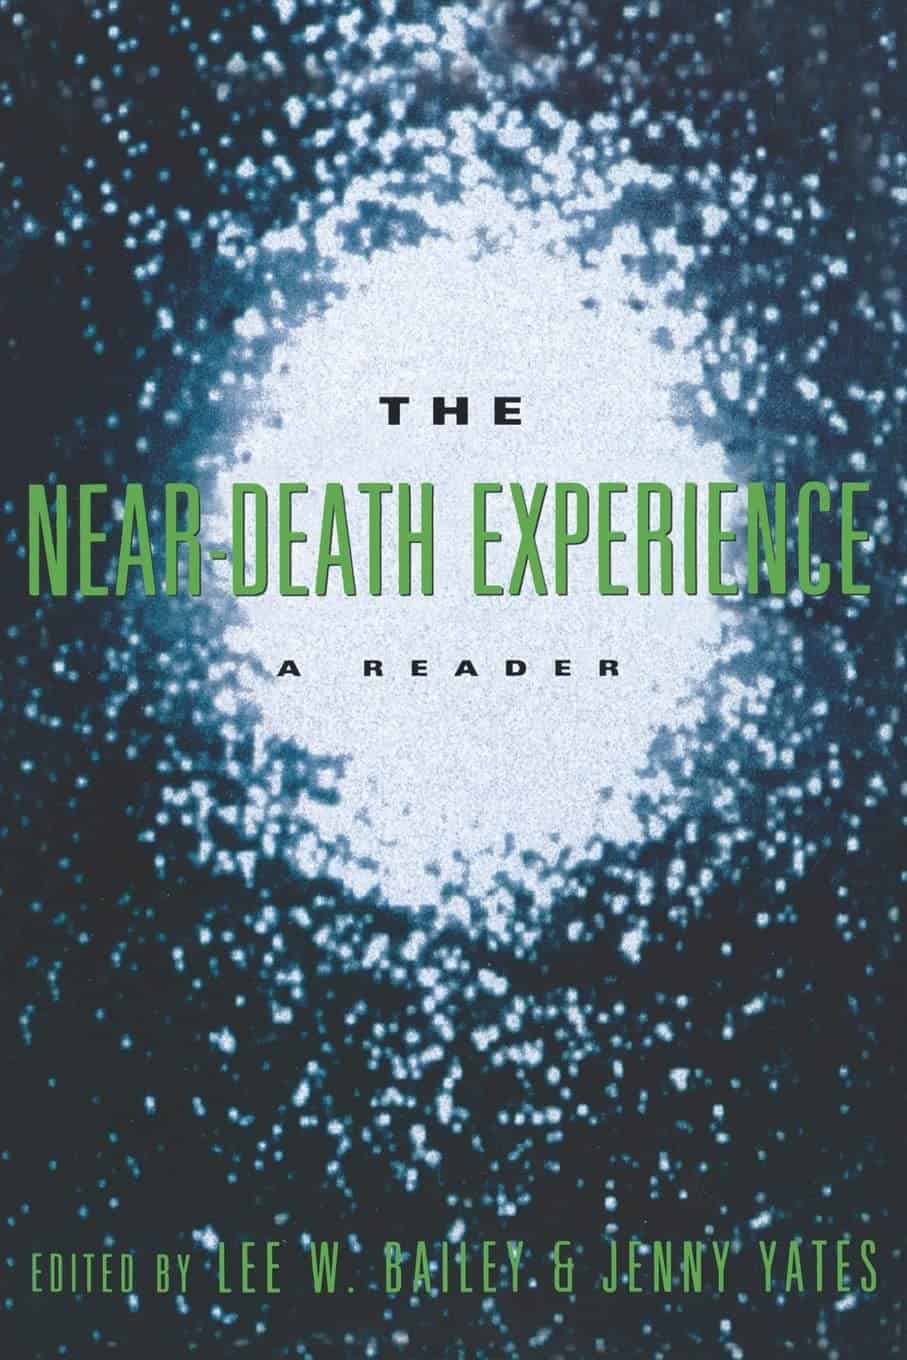 The Near-Death Experience by Lee W. Bailey and Jenny Yates